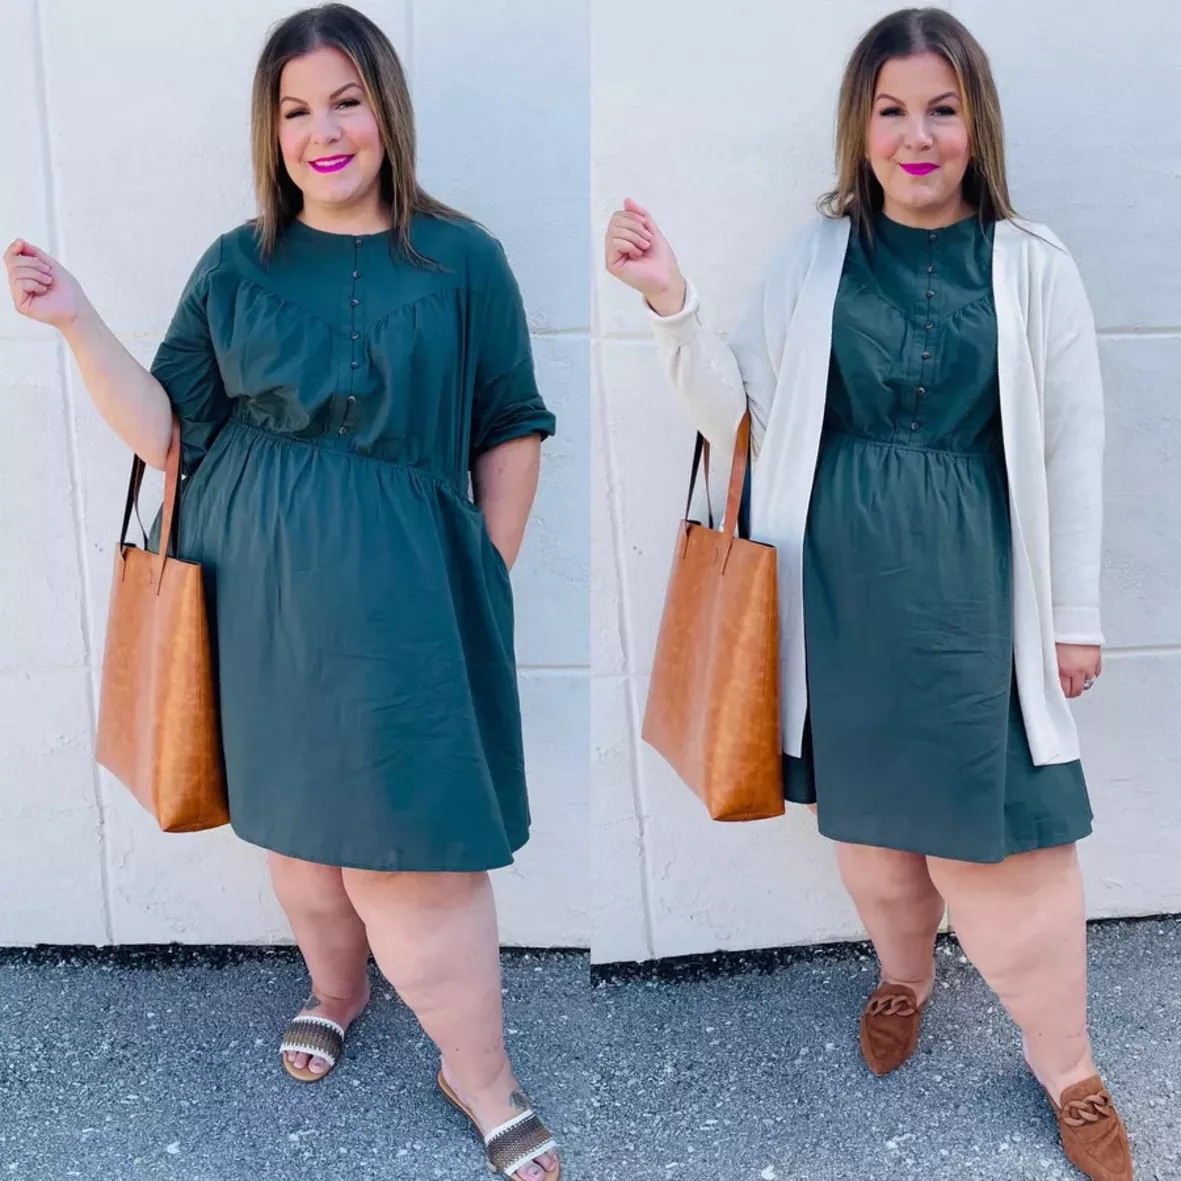 9 Stylish Outfit Ideas For Plus-Size Women